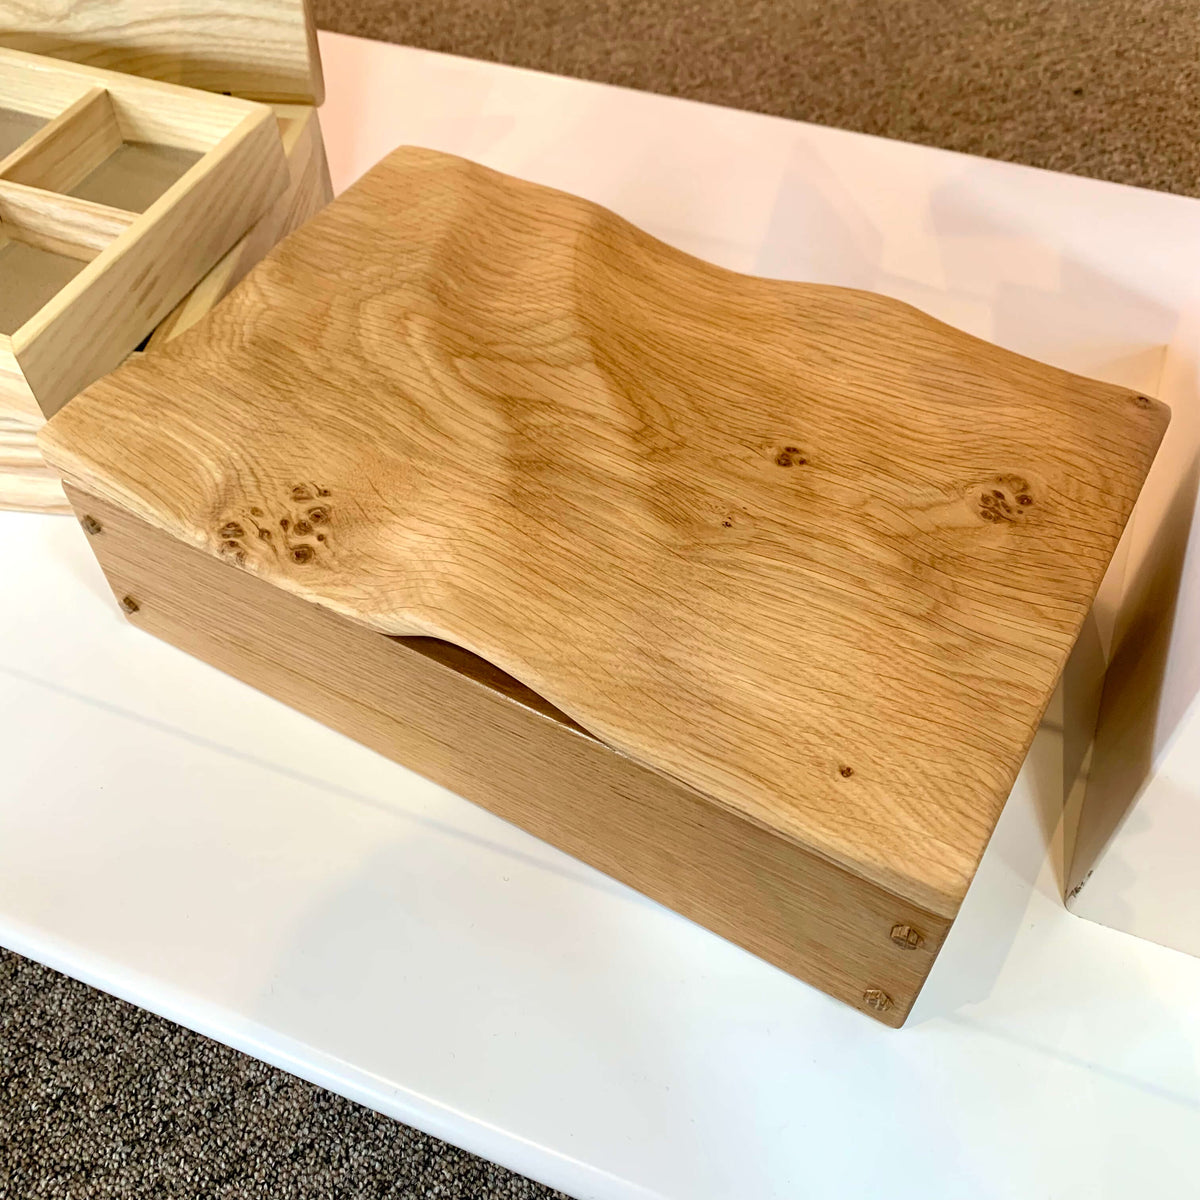 Handmade wooden jewellery box with wave design on lid, available at Ferrers Gallery.